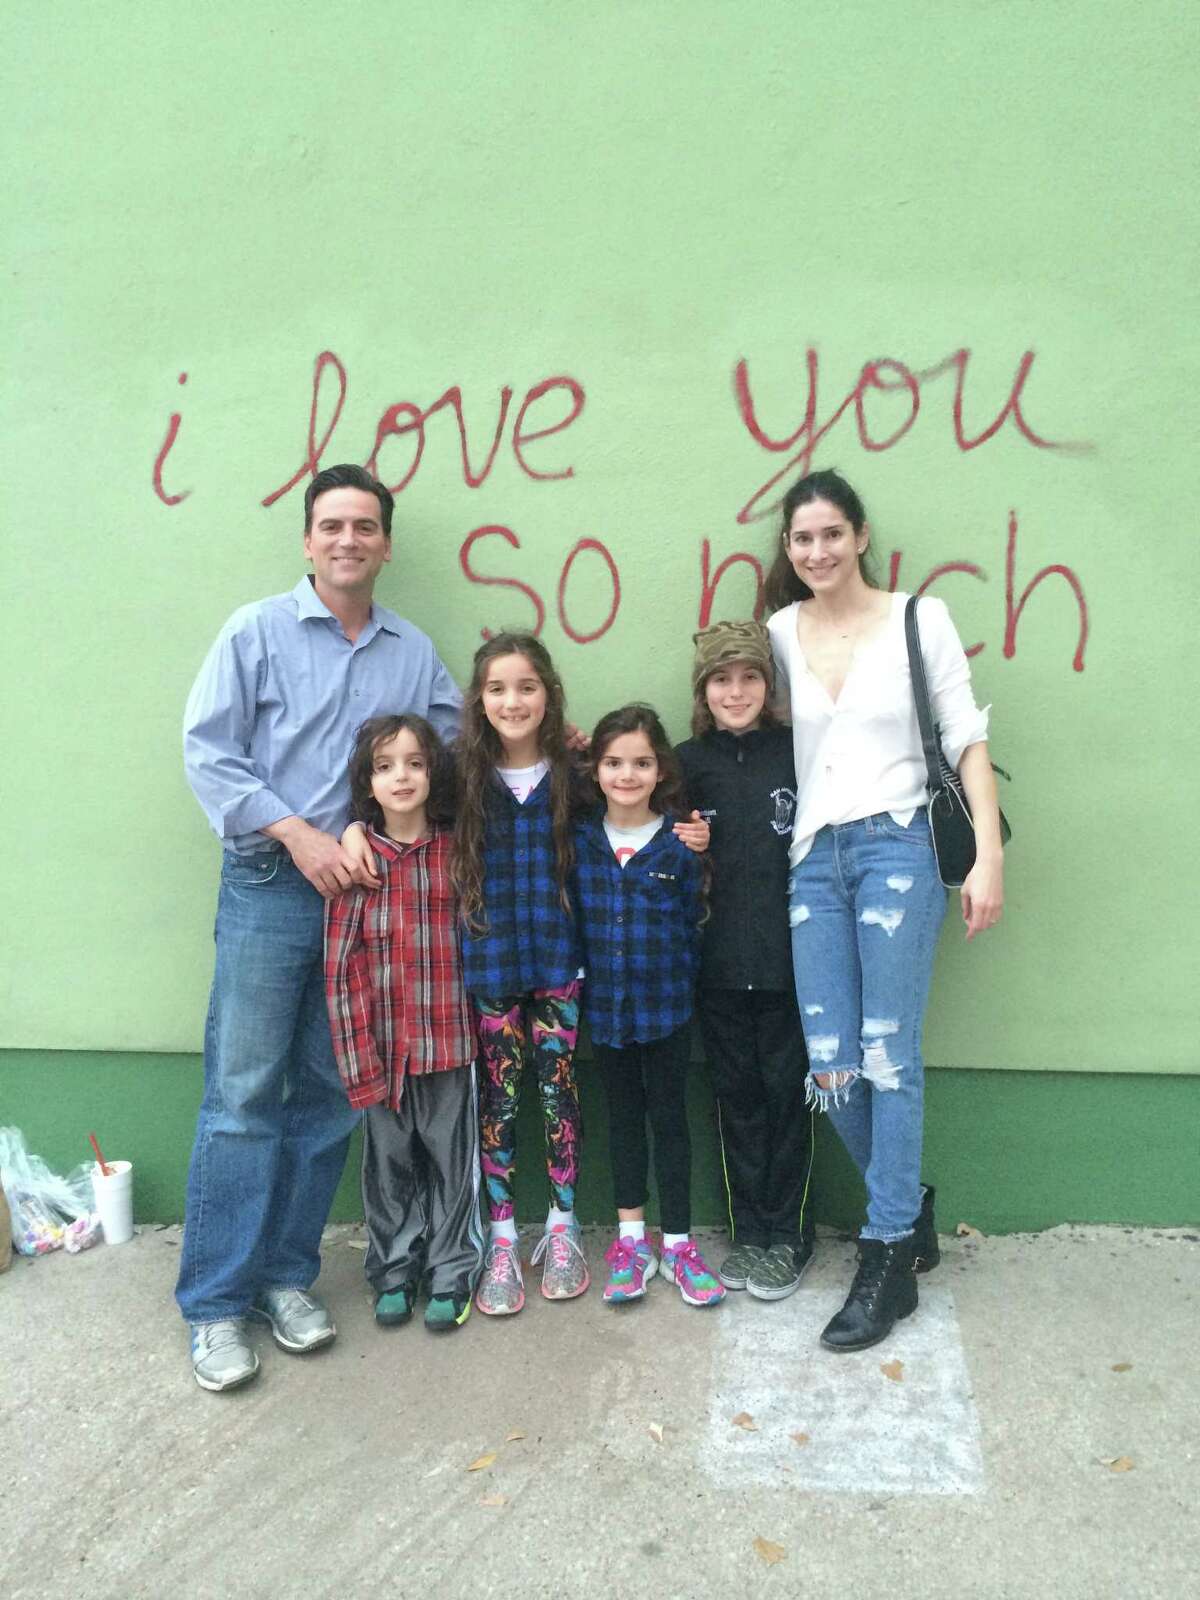 Jeff Goldblatt, wife, Lori and their four kids -- James, Styra and the twins, Sylvie and Jarett -- enjoyed an outing to Austin's iconic "I Love You Wall" on South Congress. 2014